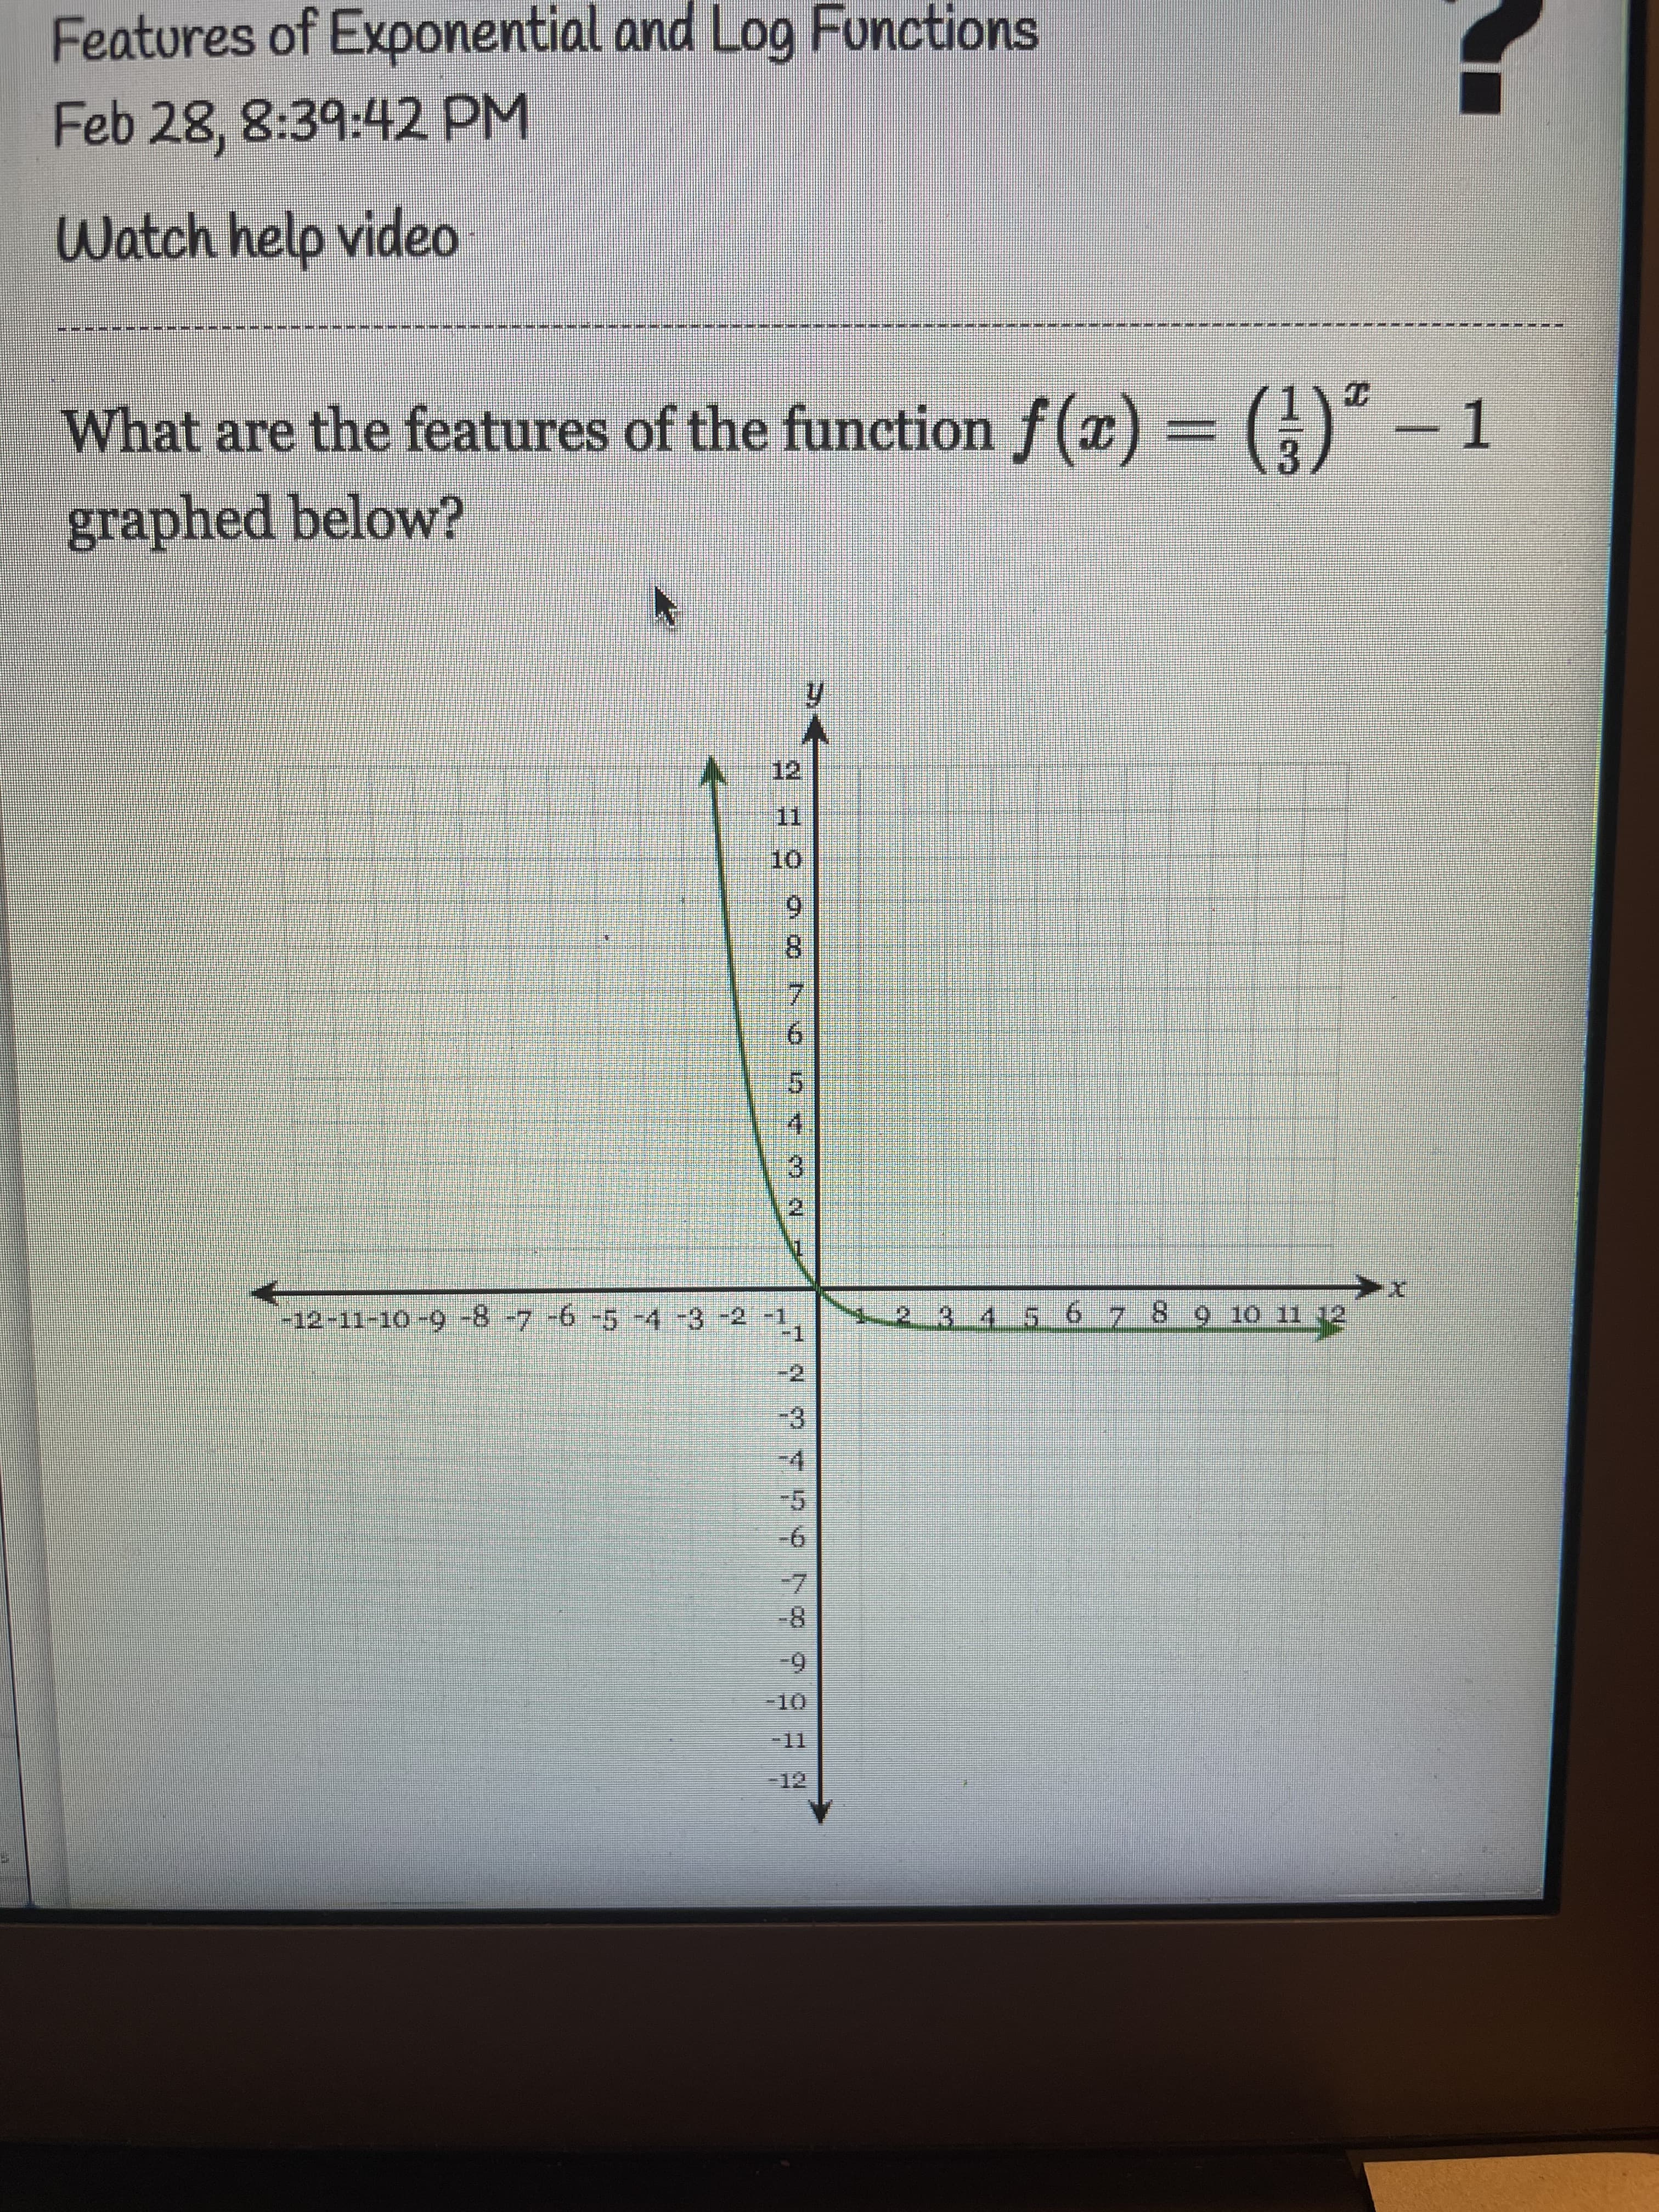 What are the features of the function f(x)
1
graphed below?
